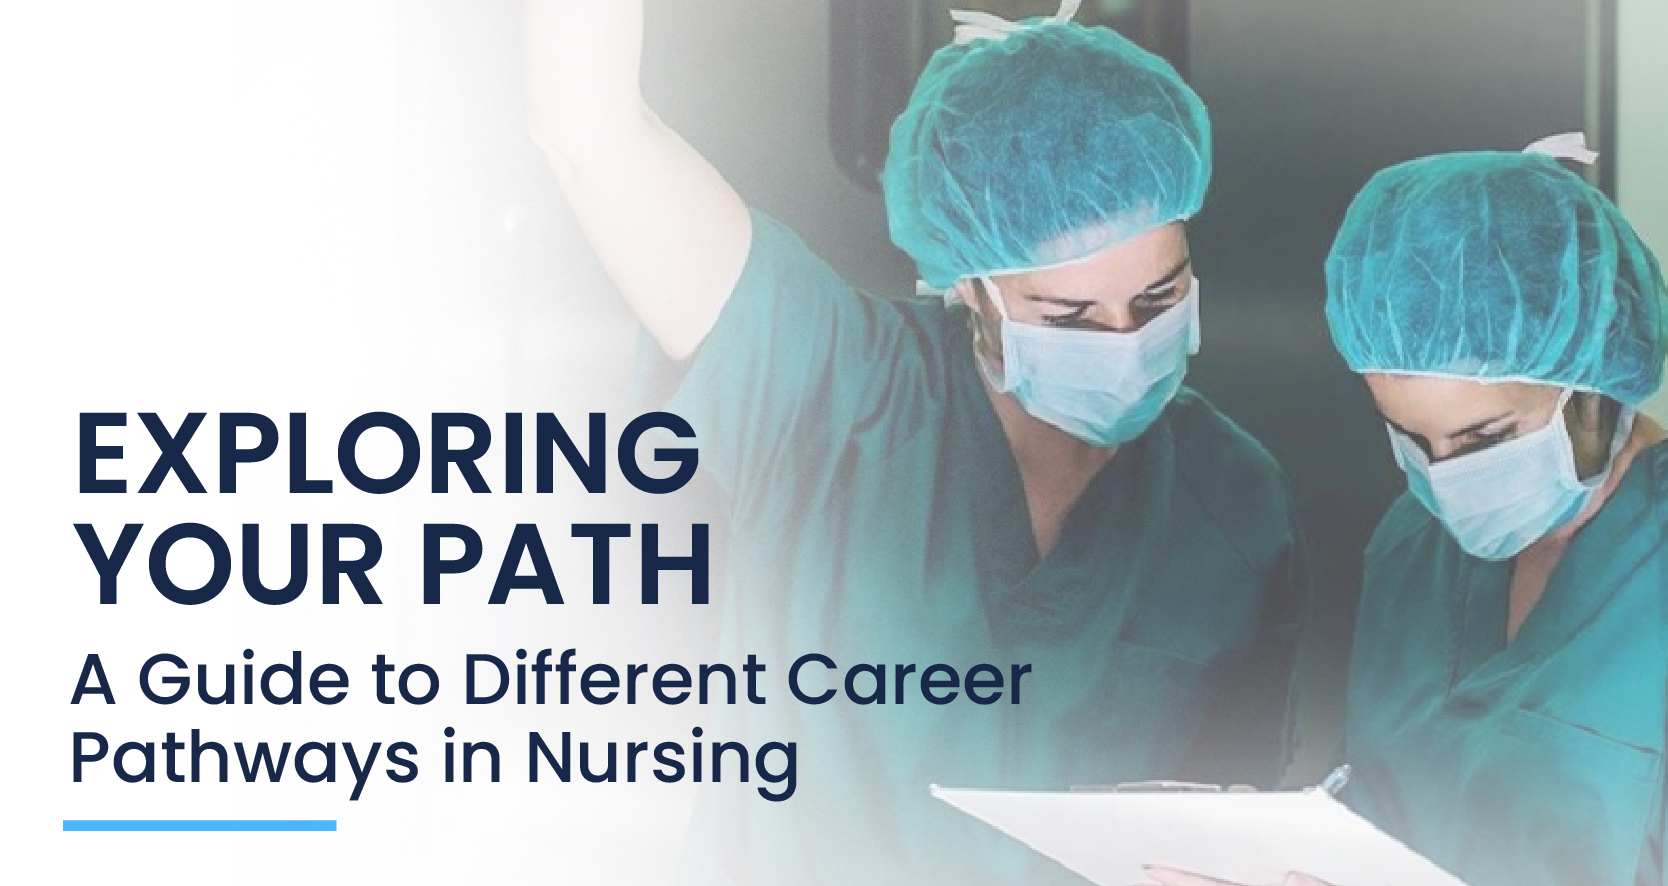 Exploring Your Path: A Guide to Different Career Pathways in Nursing